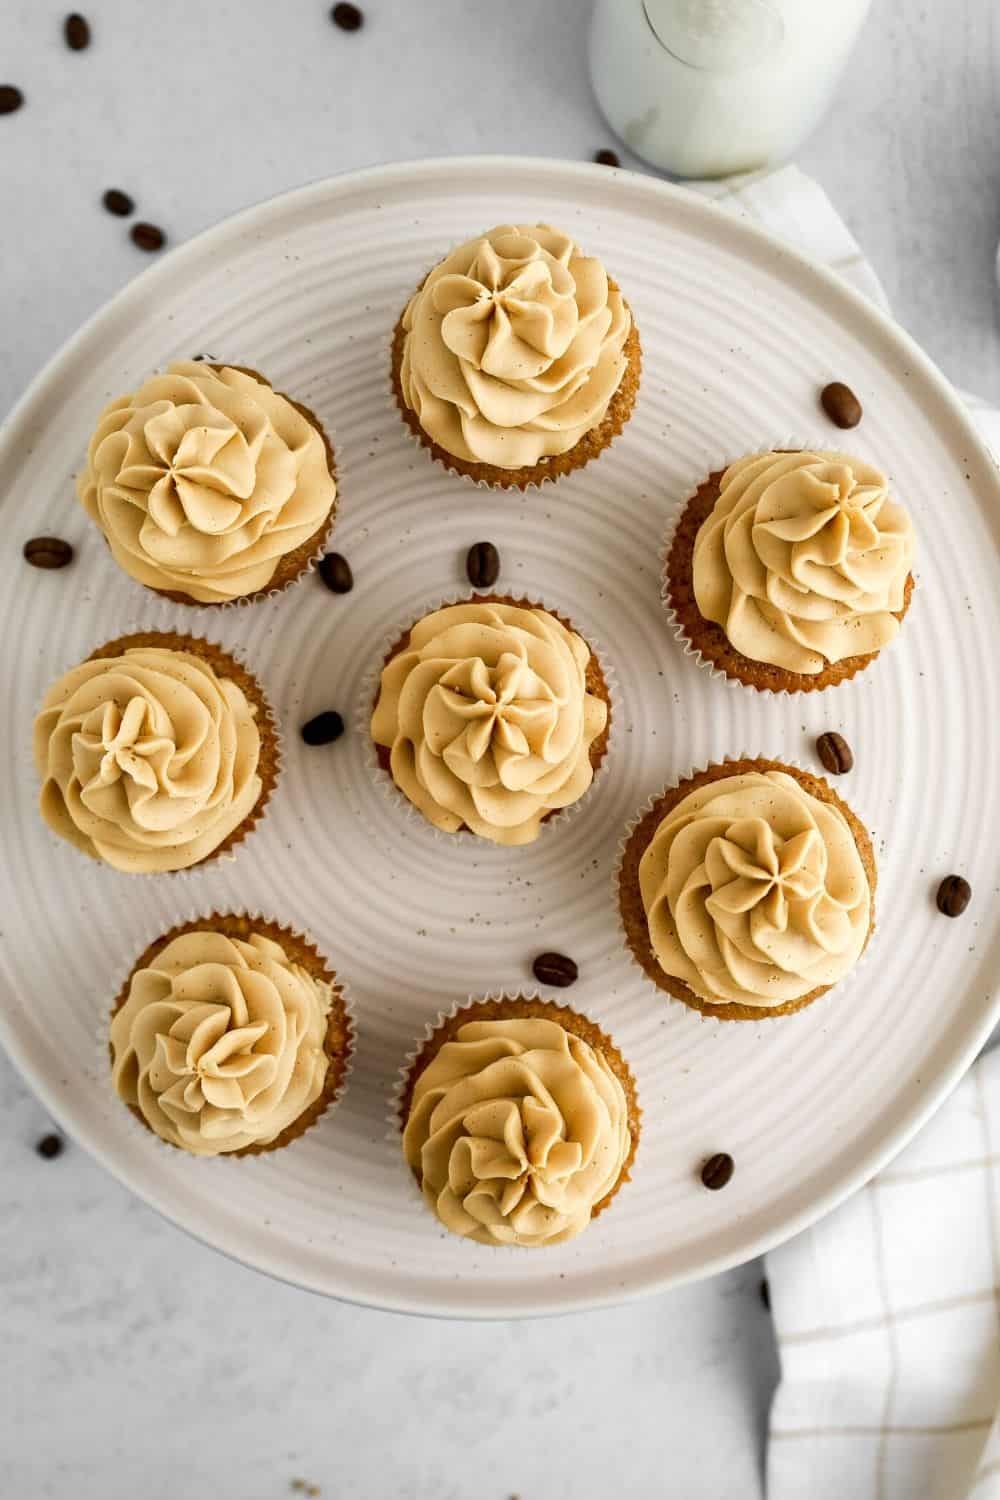 overhead view of several homemade coffee cupcakes on a cake plate, with coffee beans scattered around